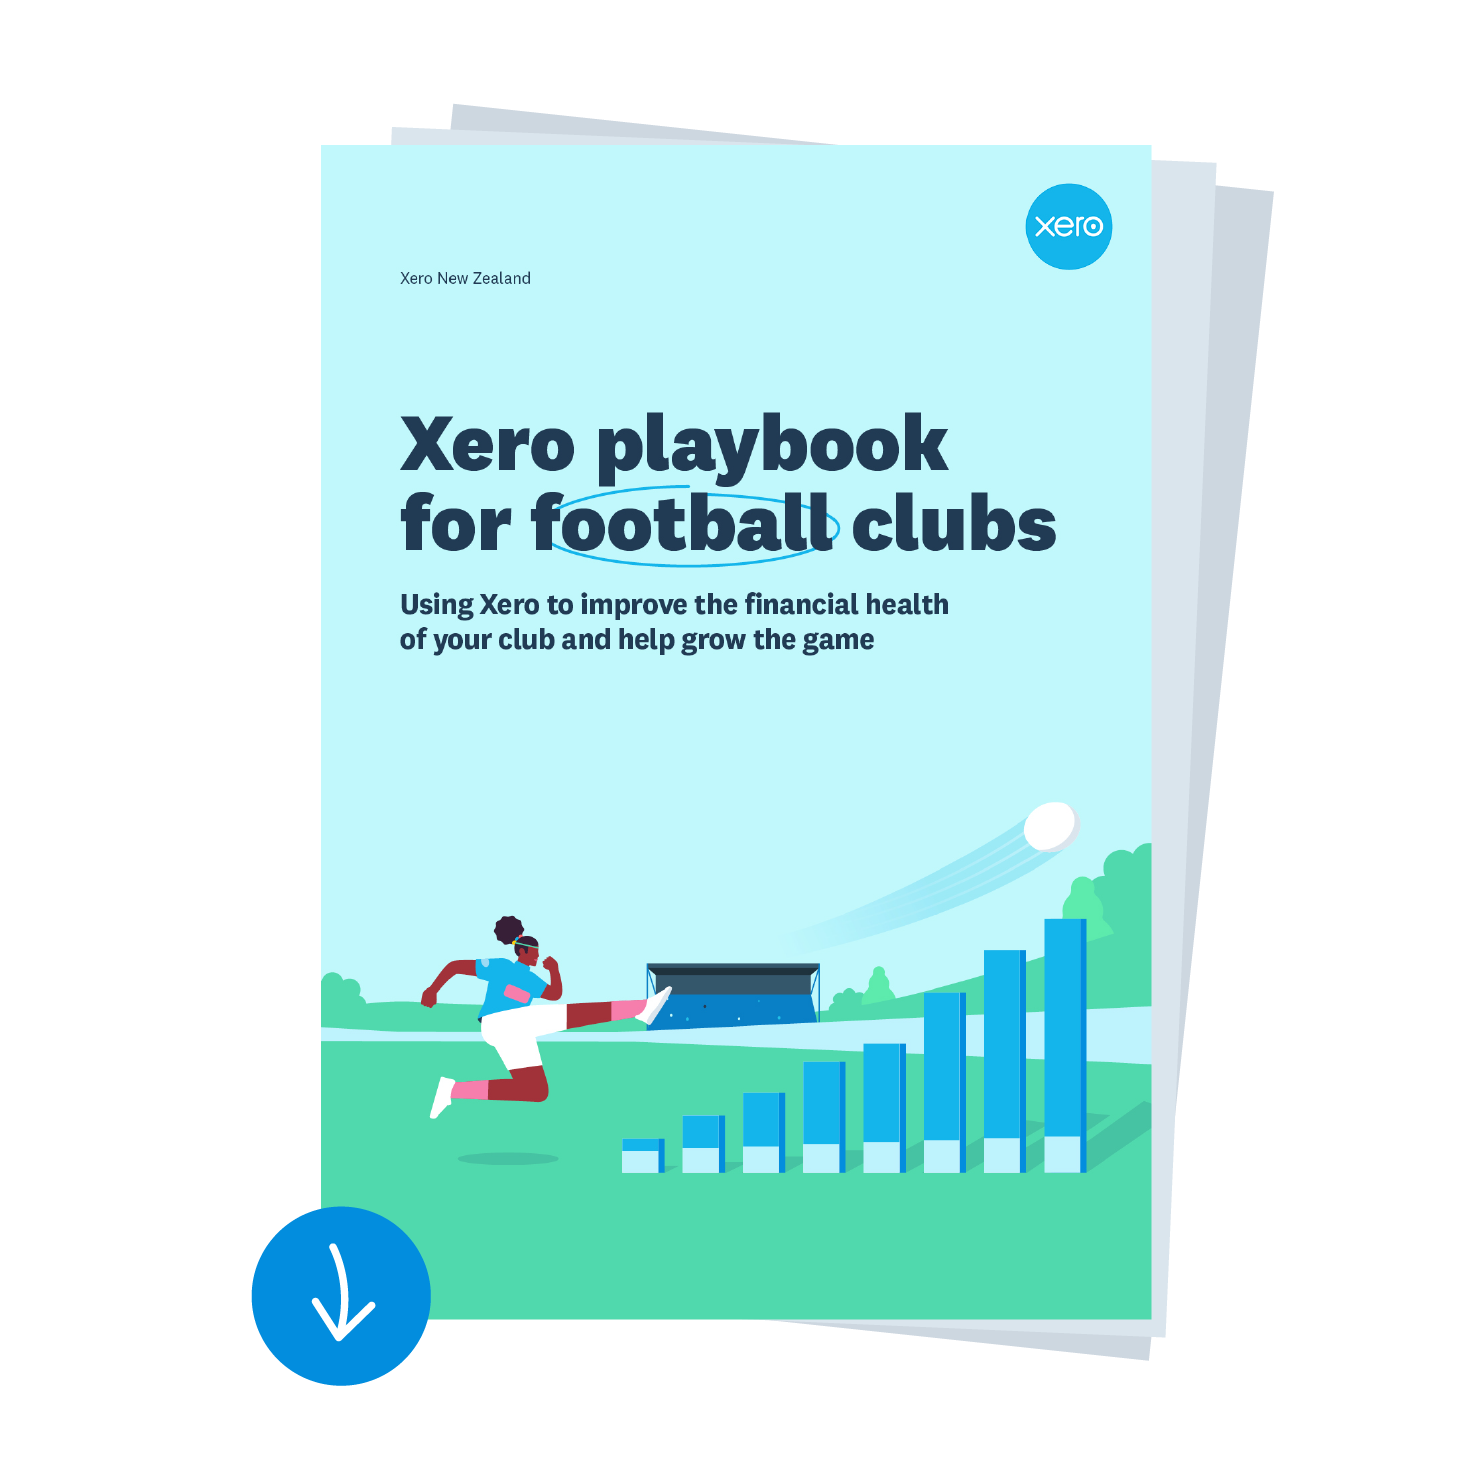 Image of the front cover of the Xero playbook for clubs which features an illustration of a women playing football